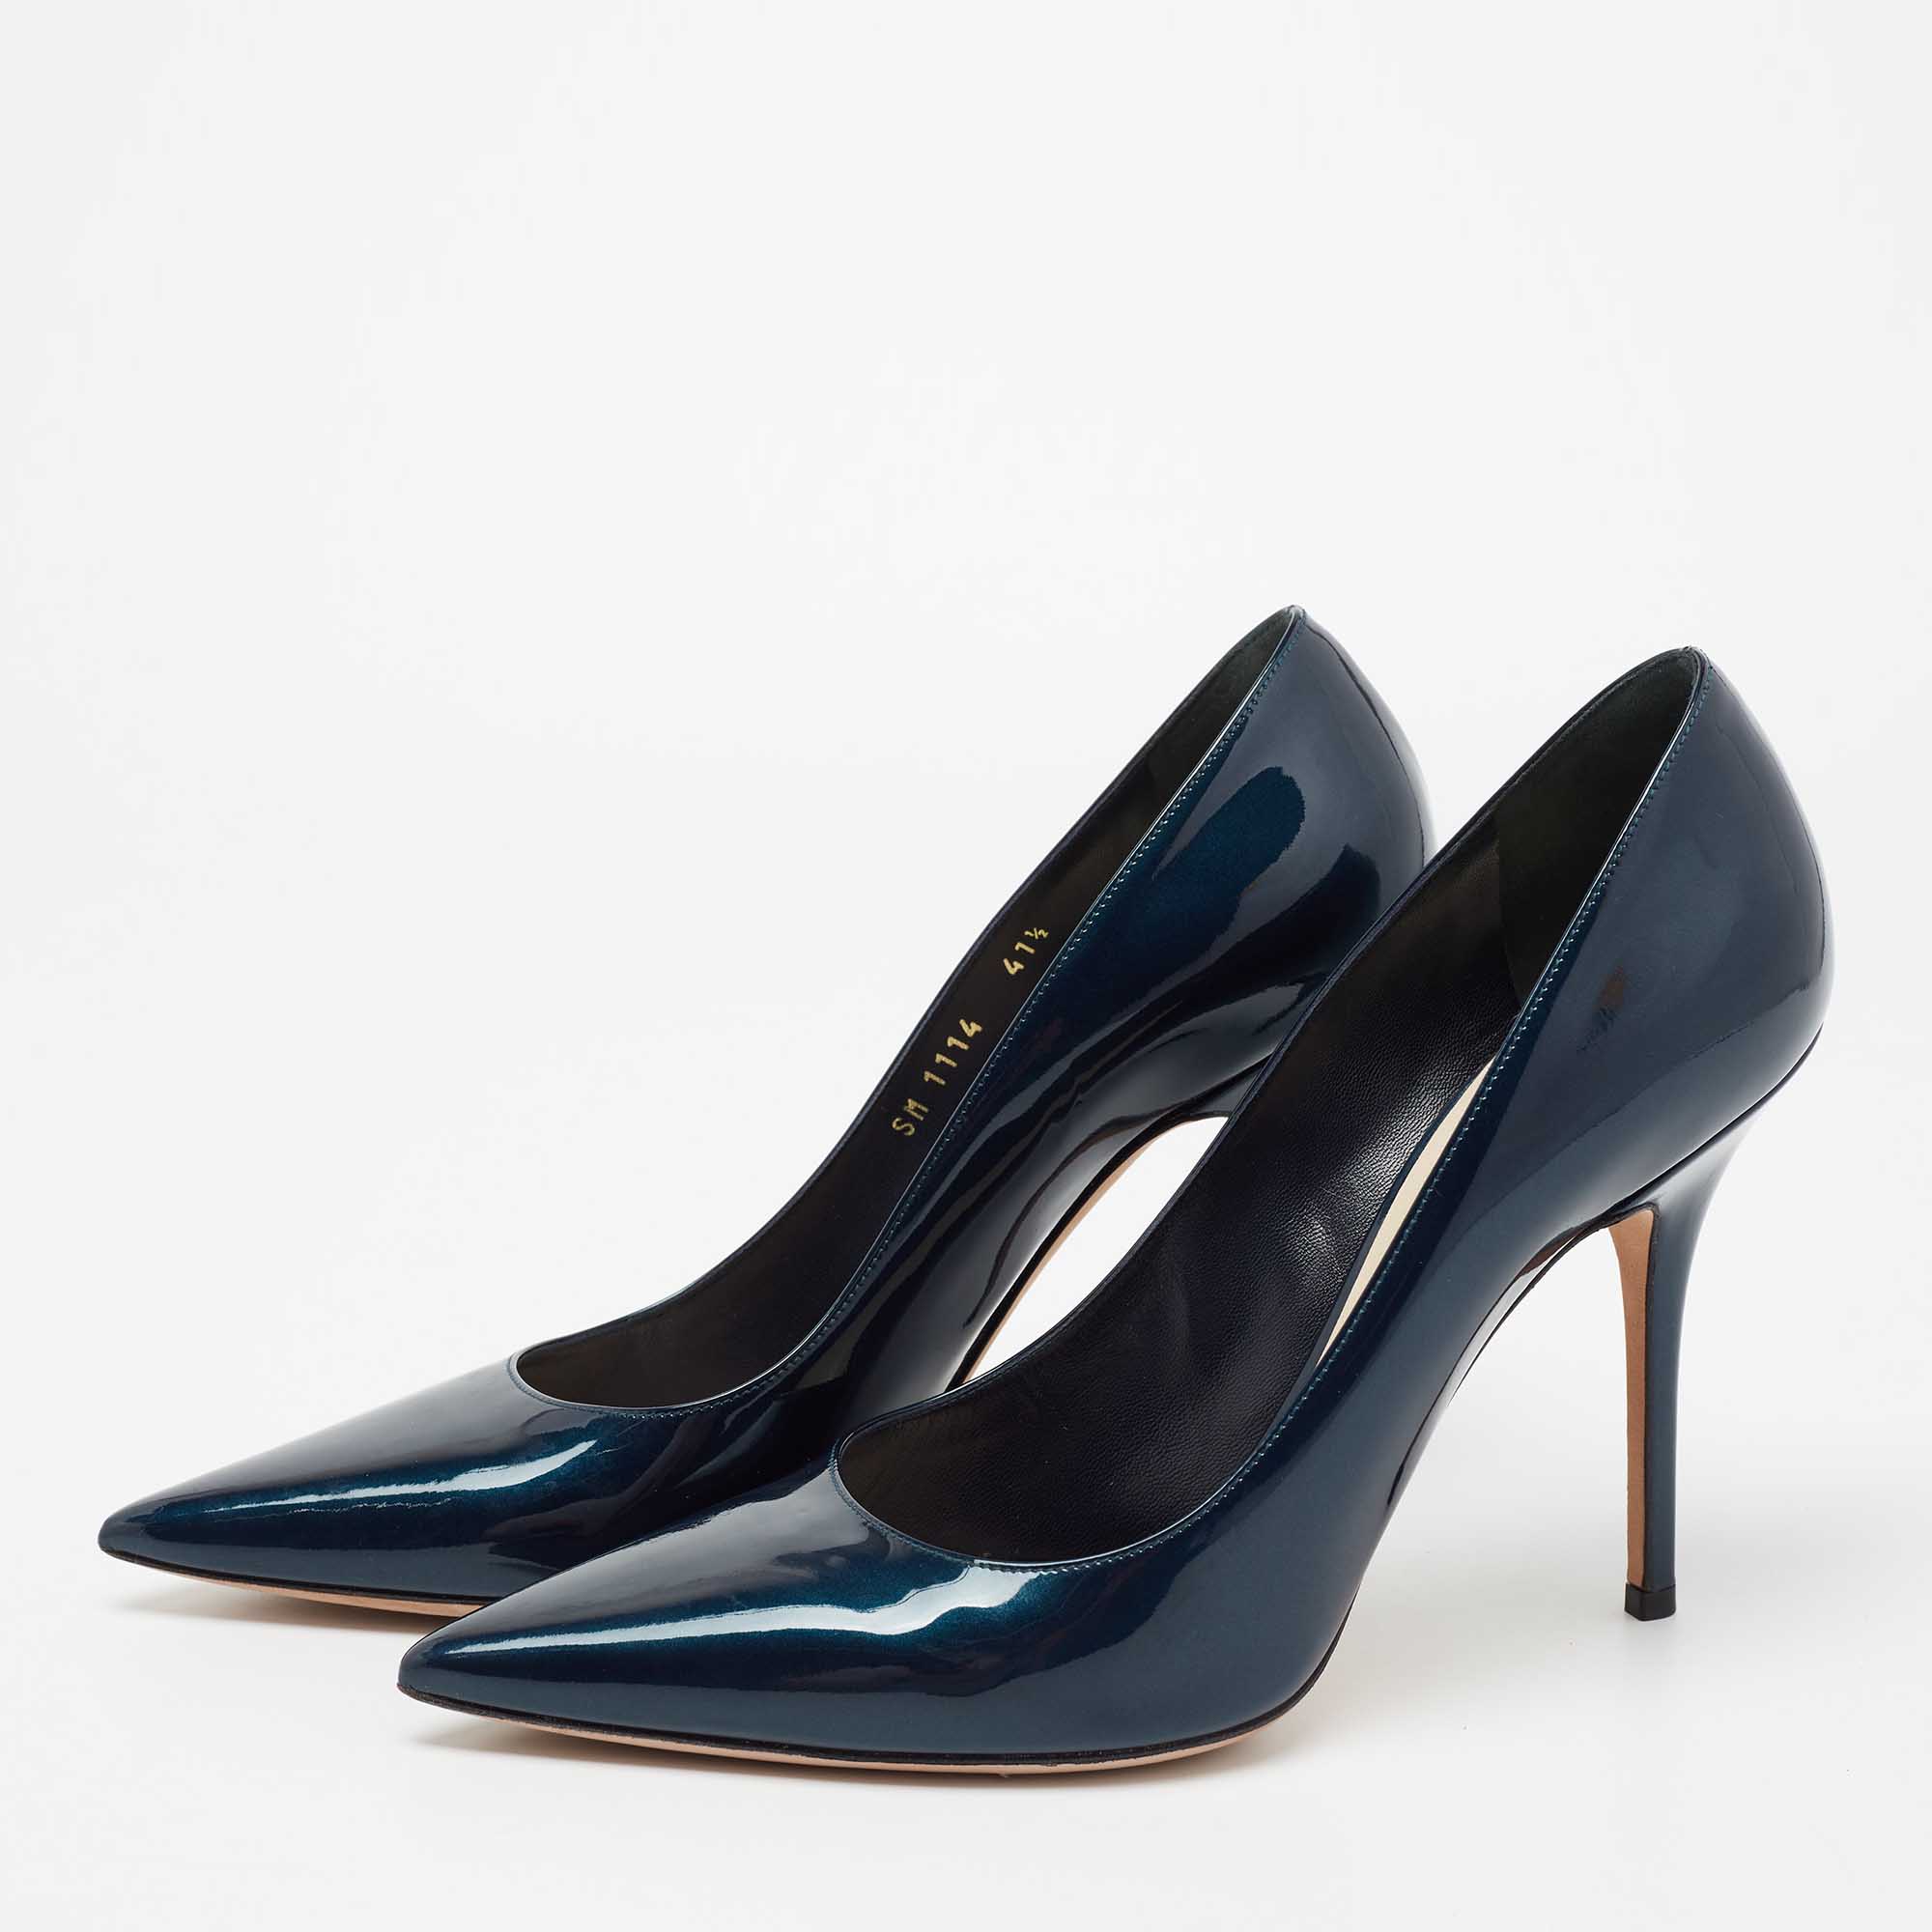 

Dior Metallic Navy Blue Patent Leather Cherie Pointed Toe Pumps Size